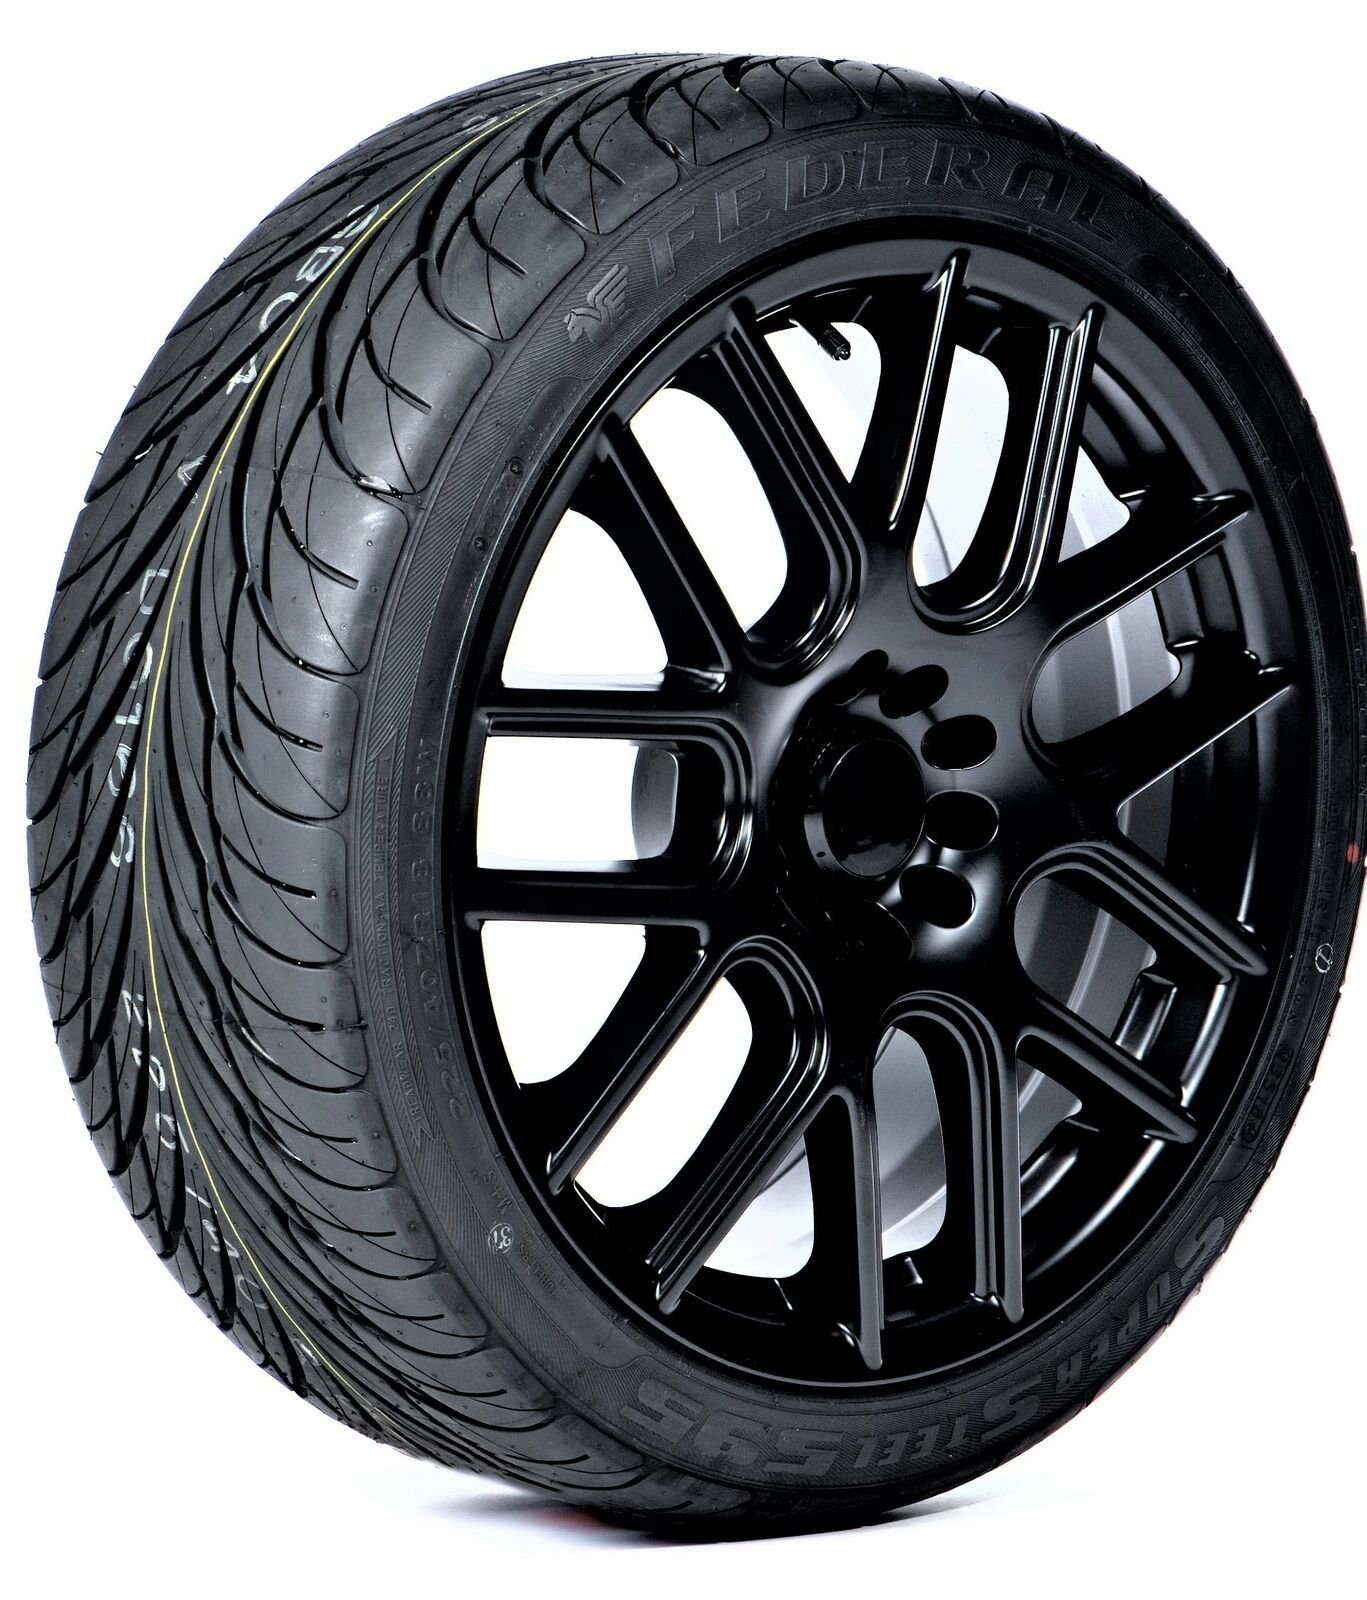 New Federal SS595 Performance Tire - 275/40R17 275 40 17 2754017 98V